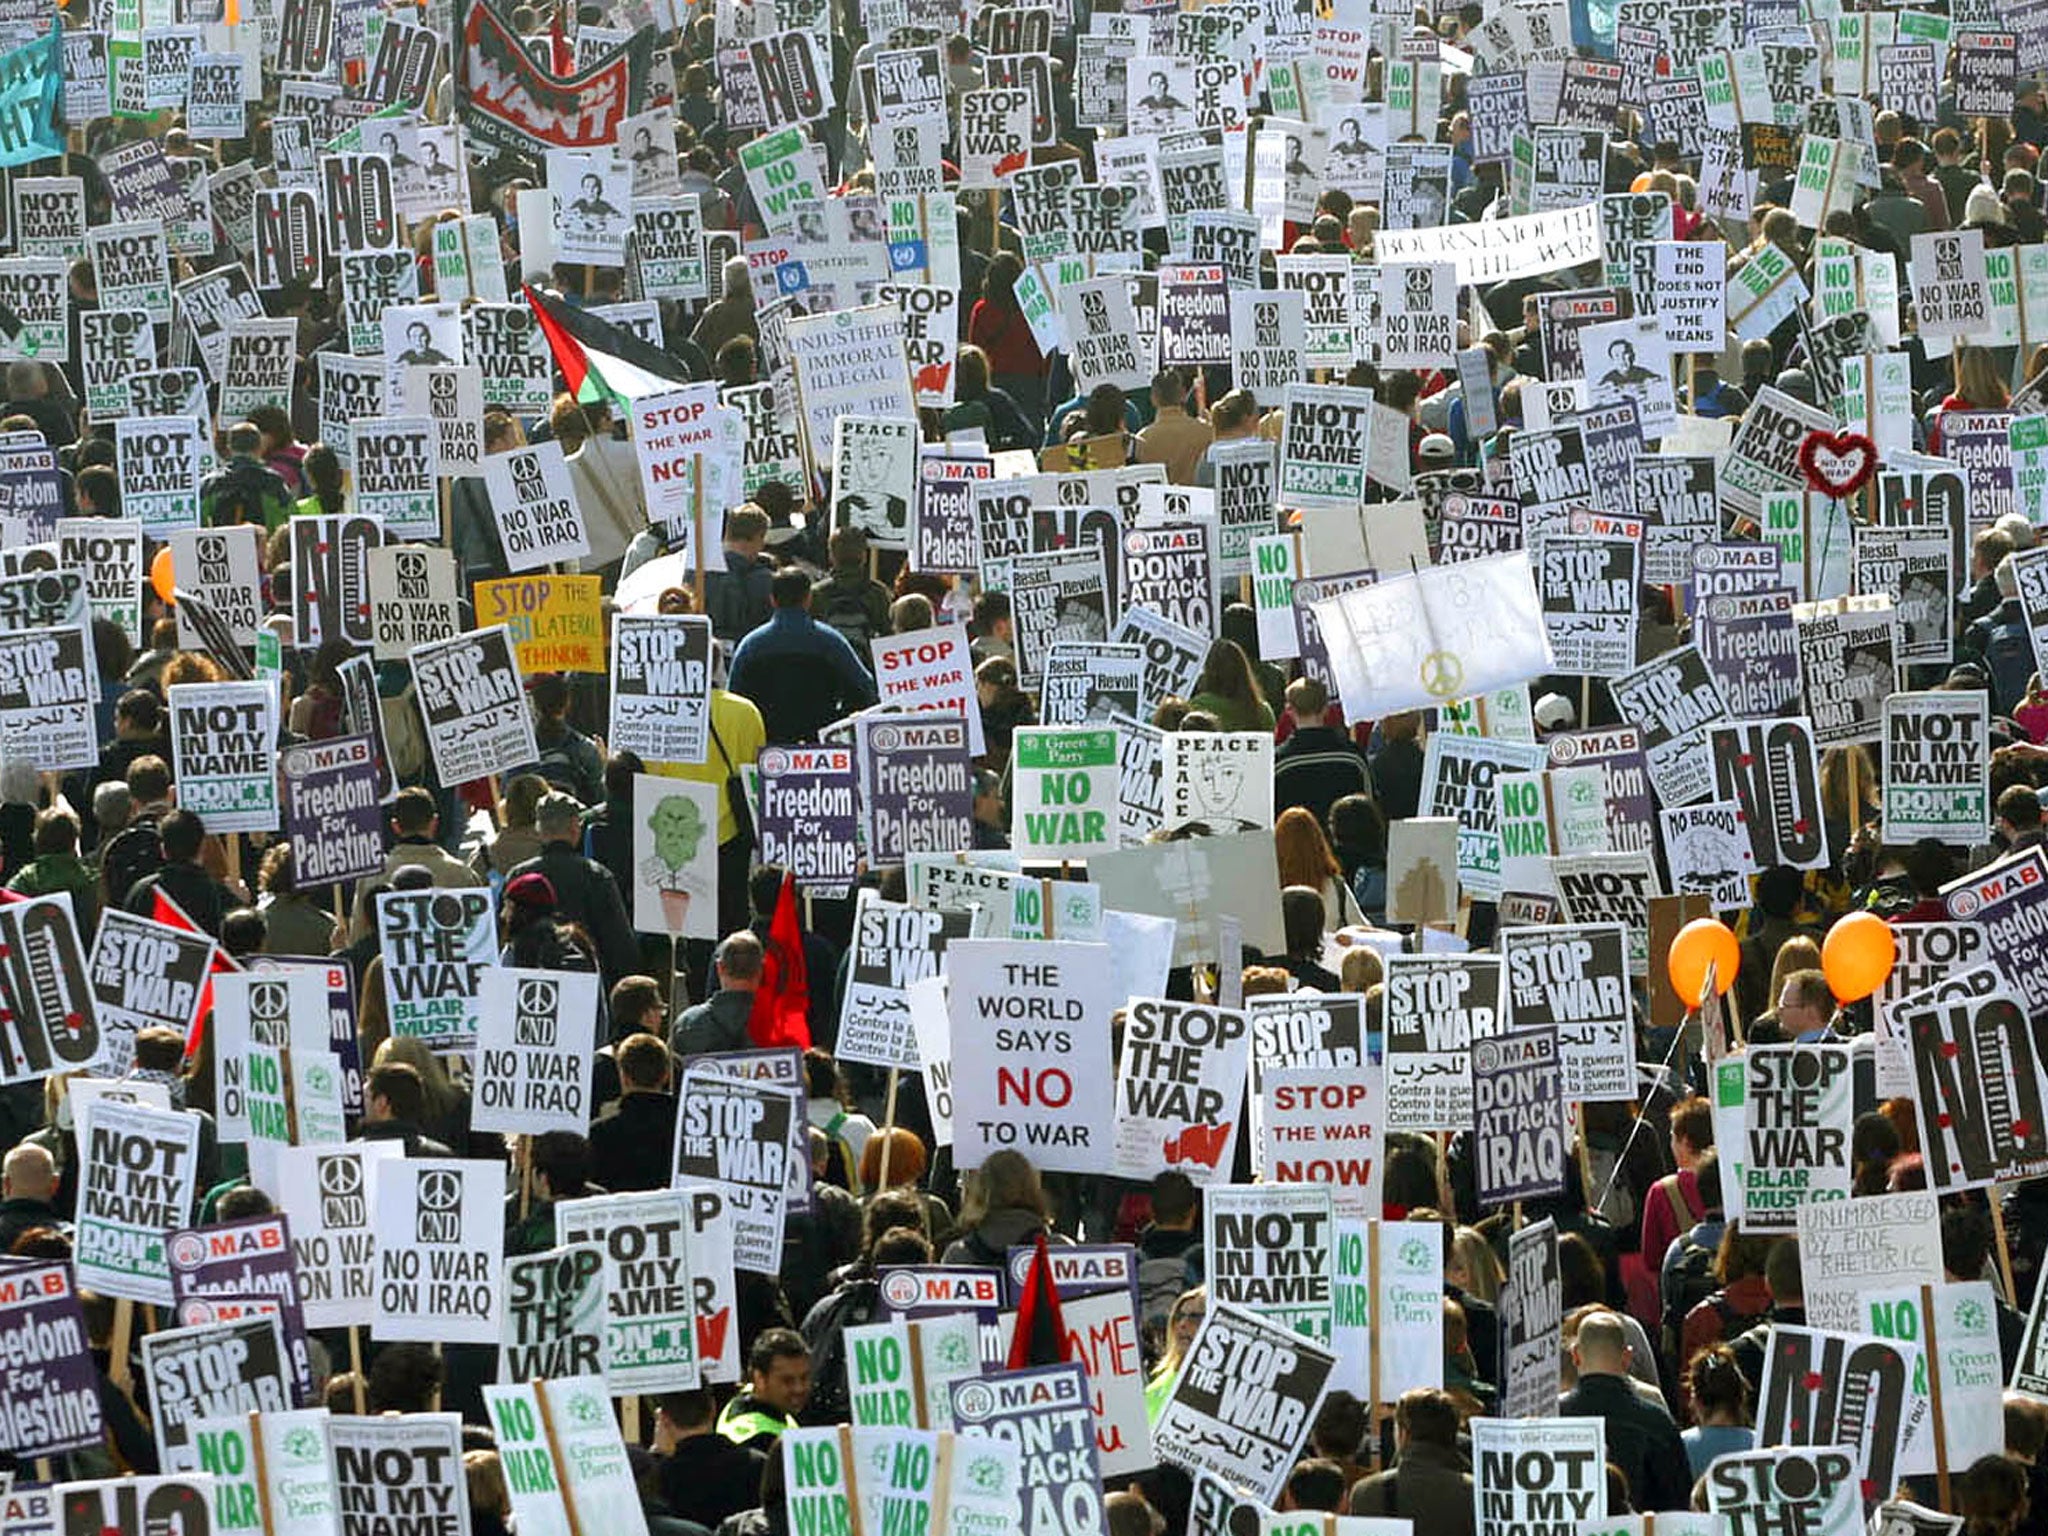 Protesters against the war in Iraq marching in March 2003